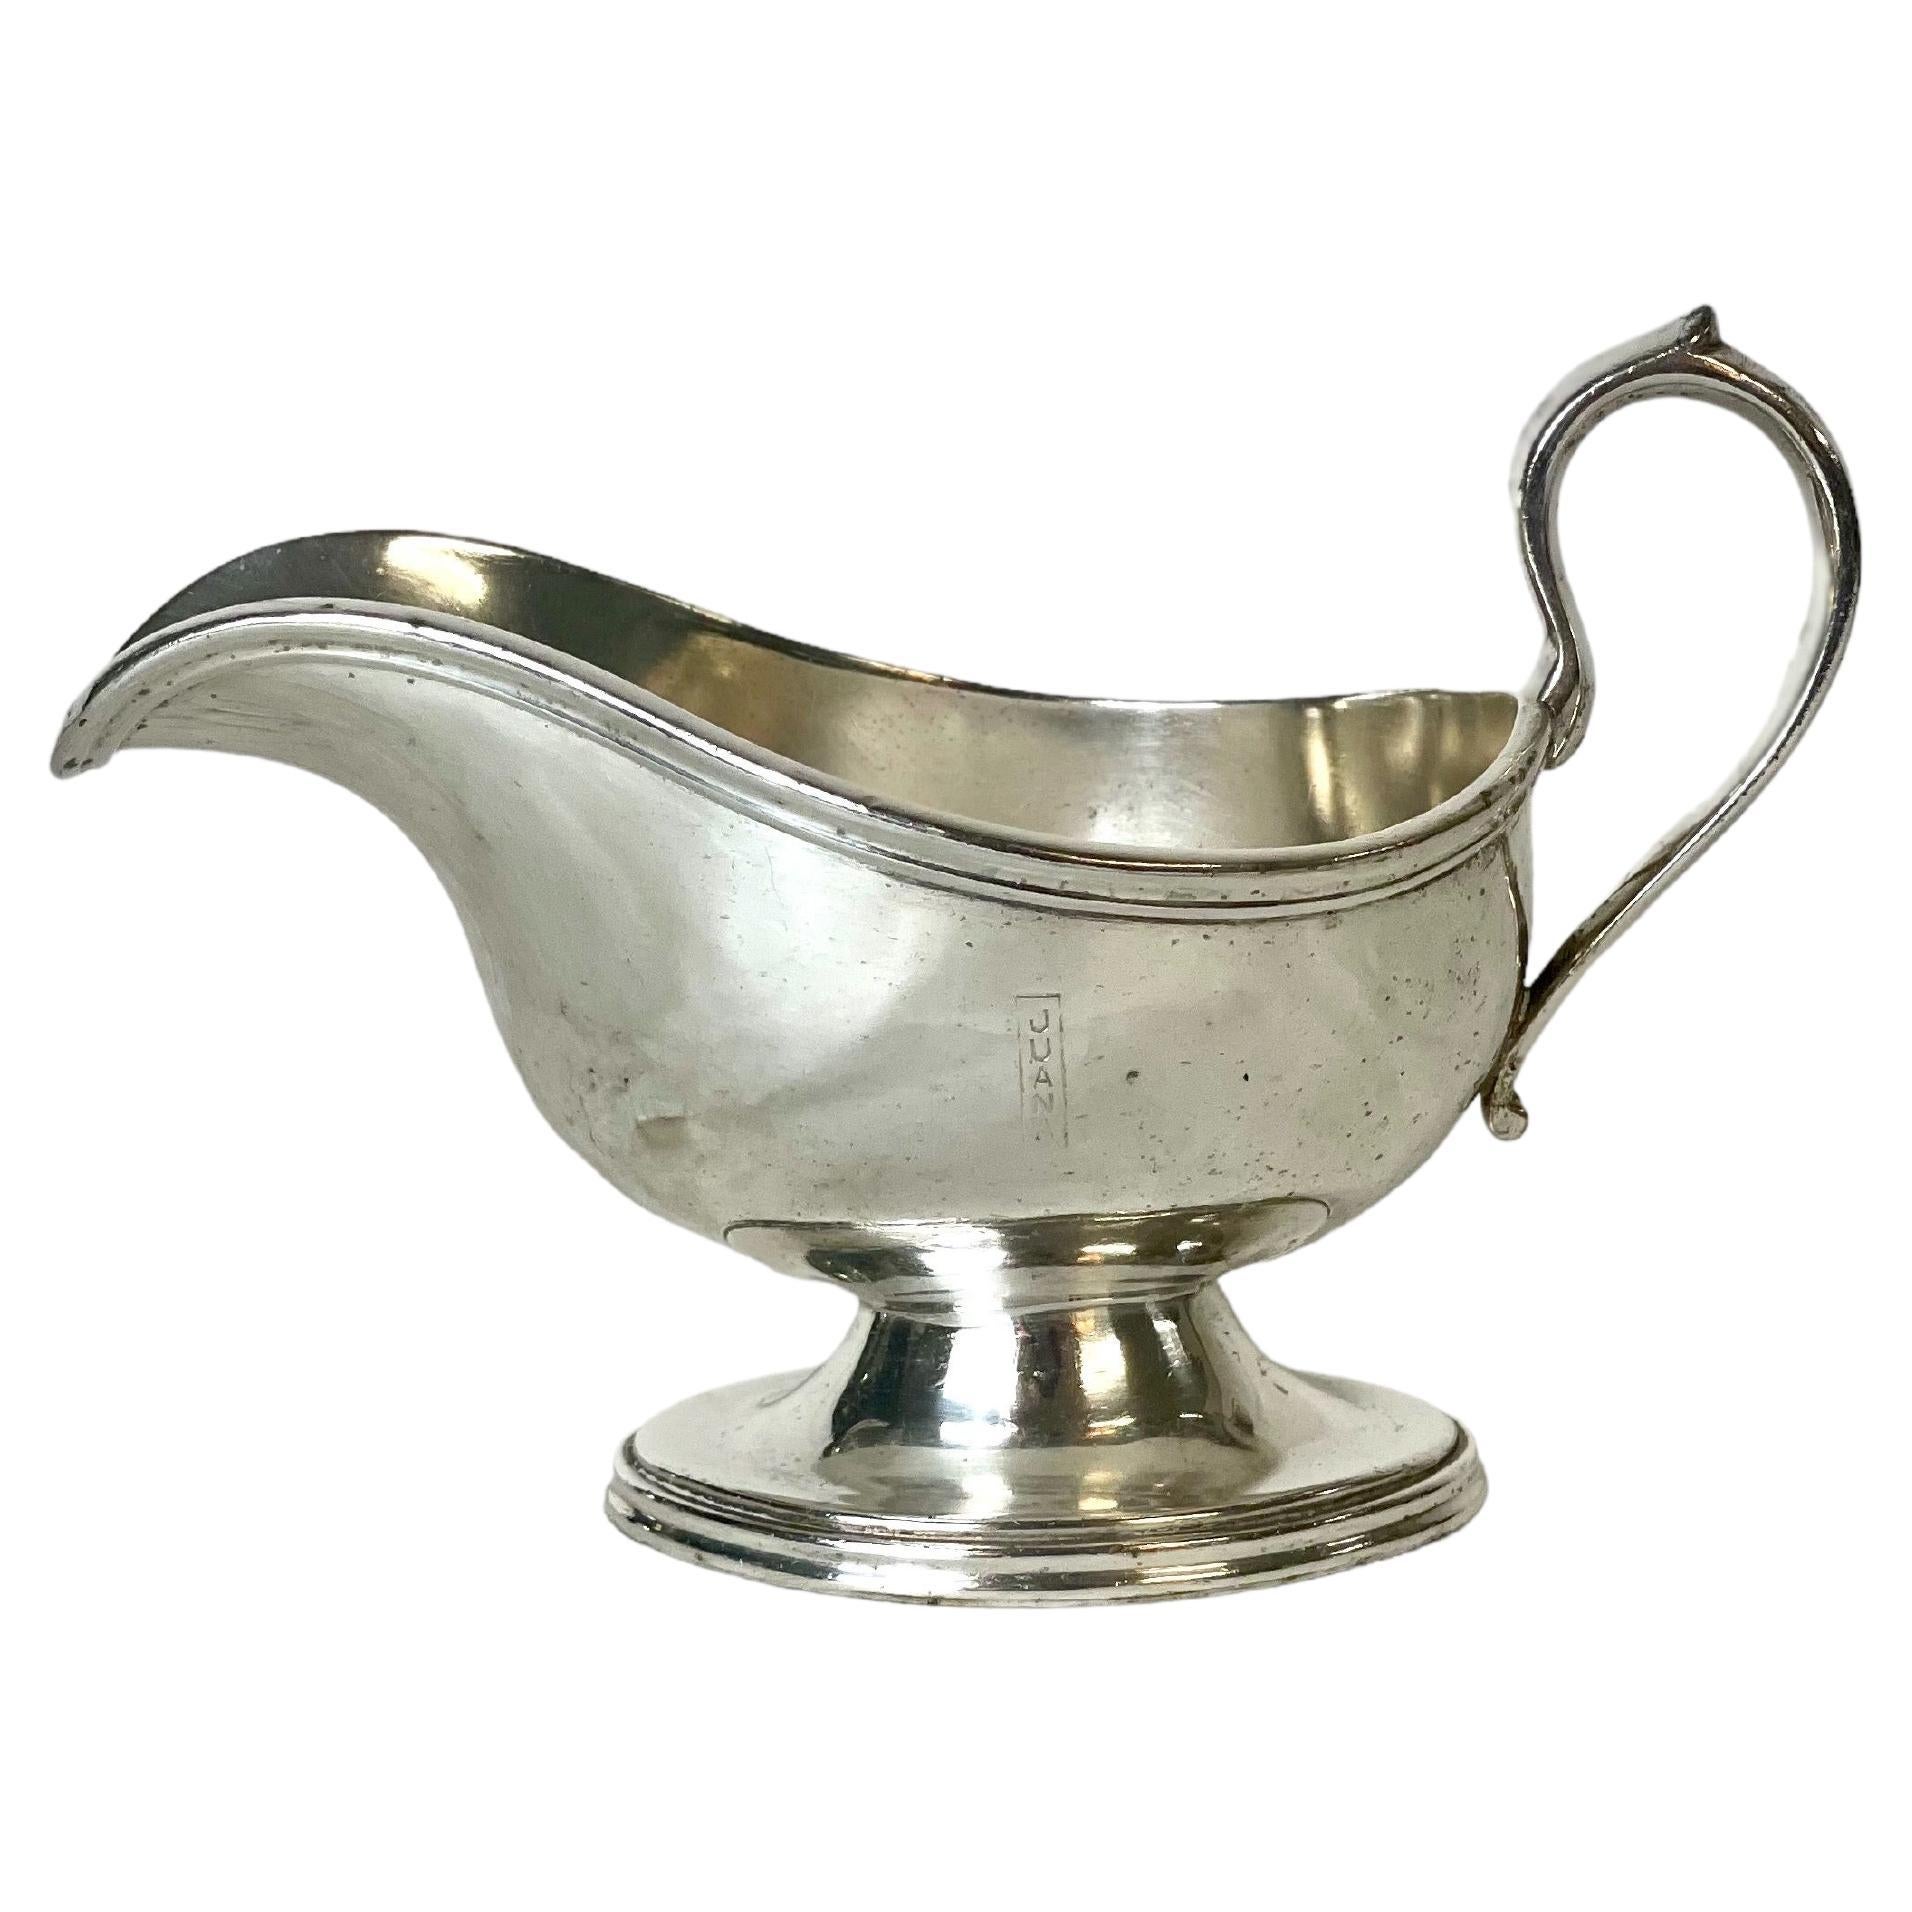 Silver-Plated Gravy or Sauce Boat from the Hotel Juana